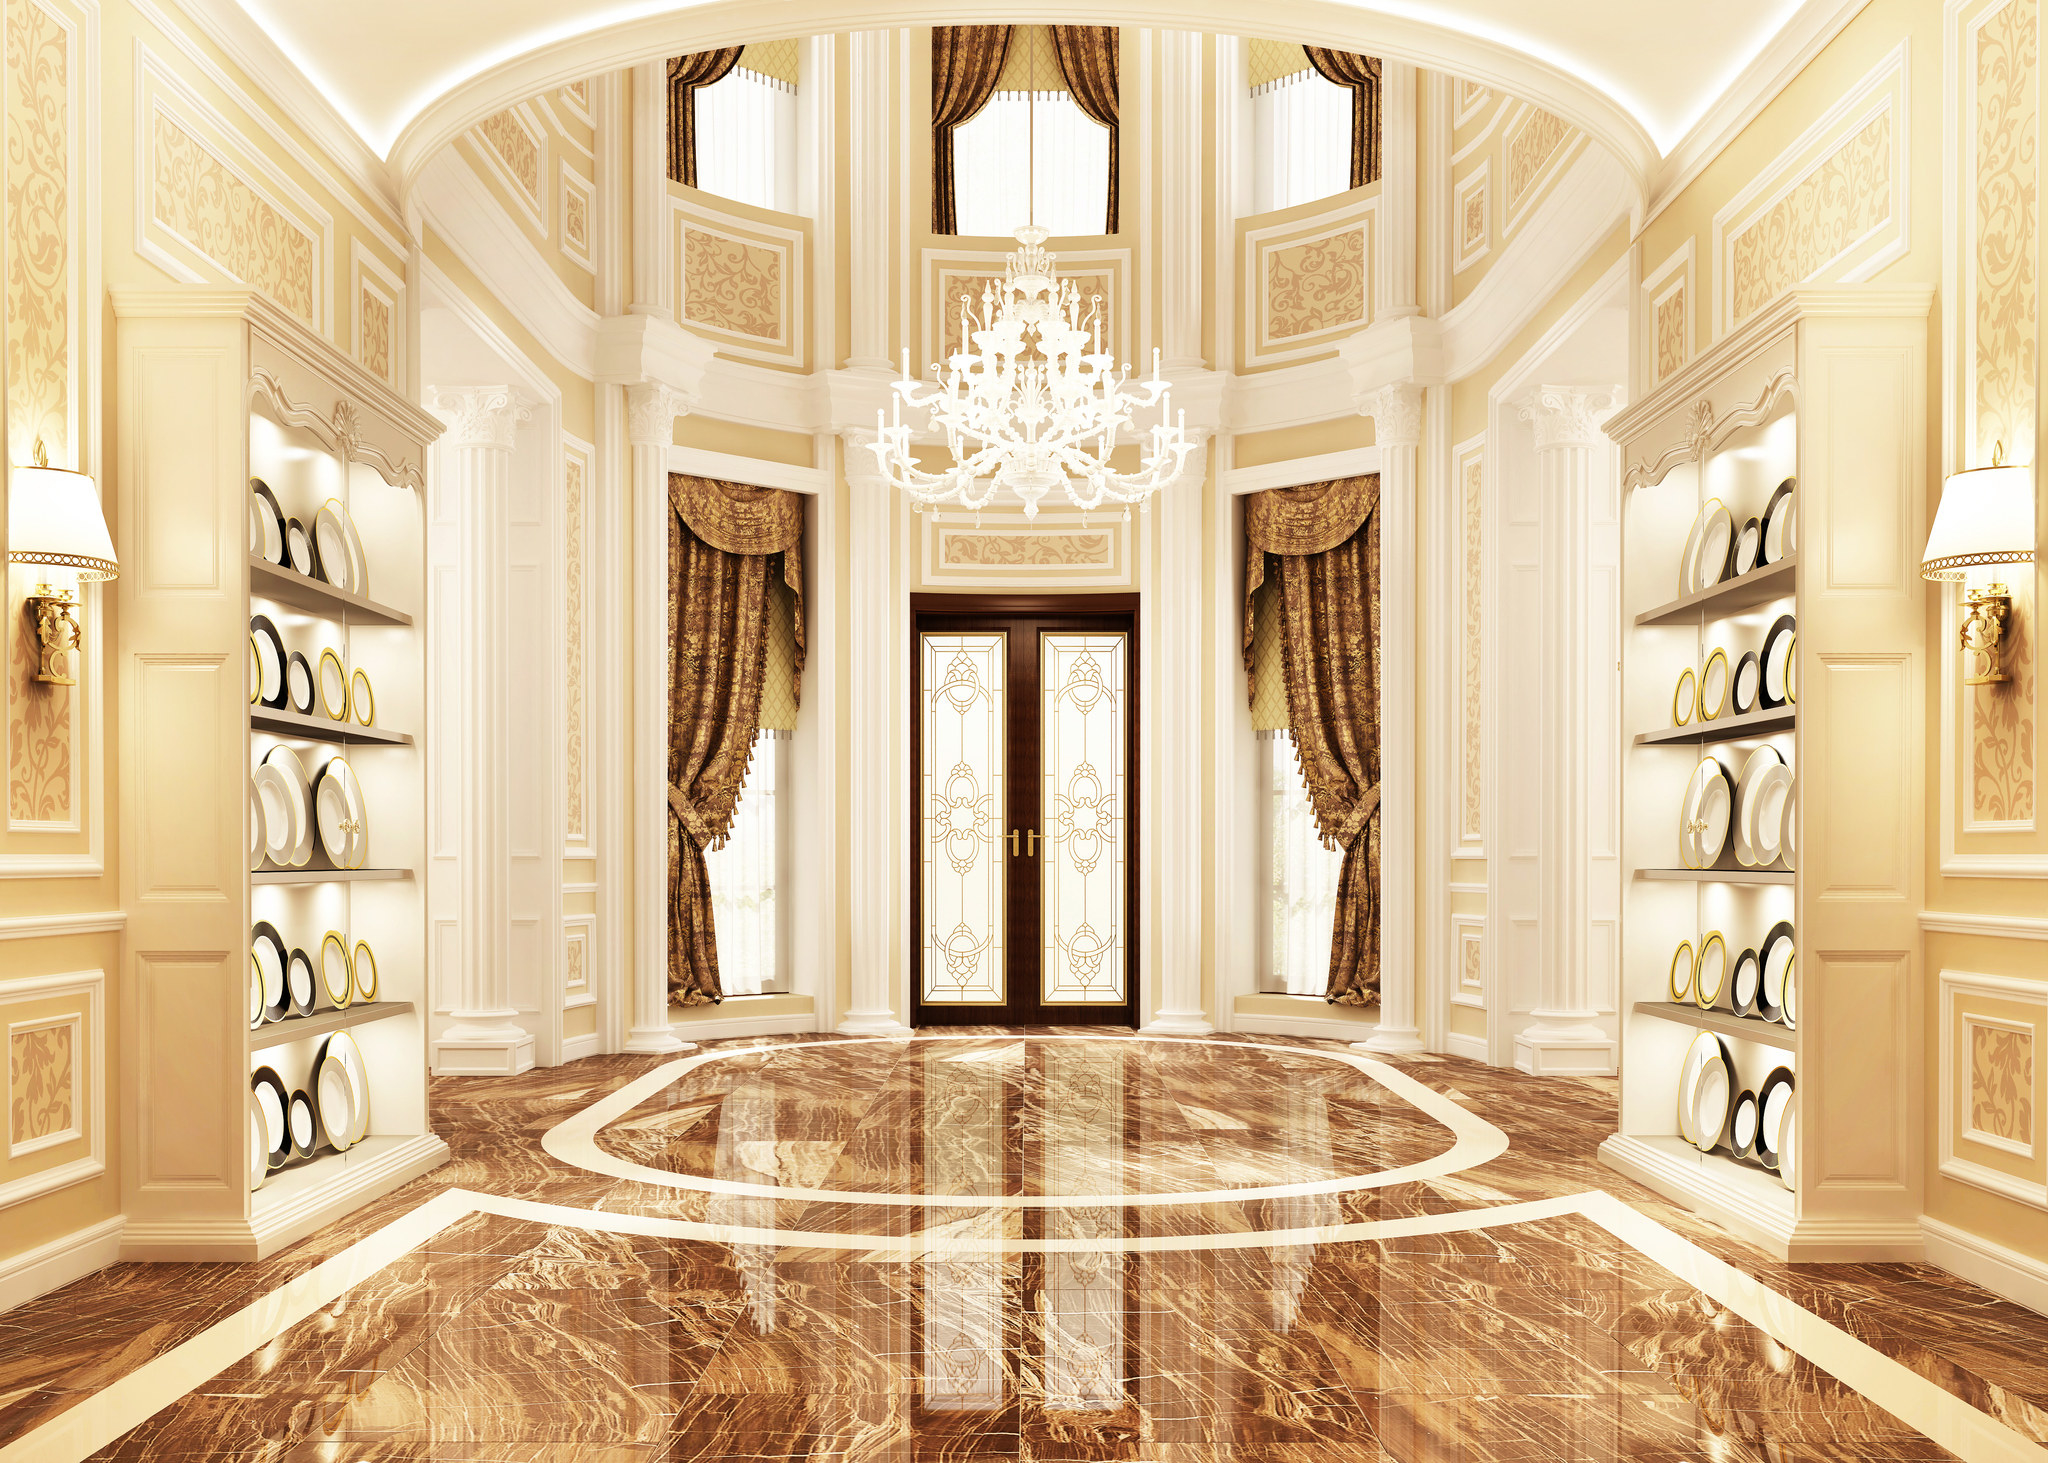 Entryway of a grand house with a chandelier and polished floors